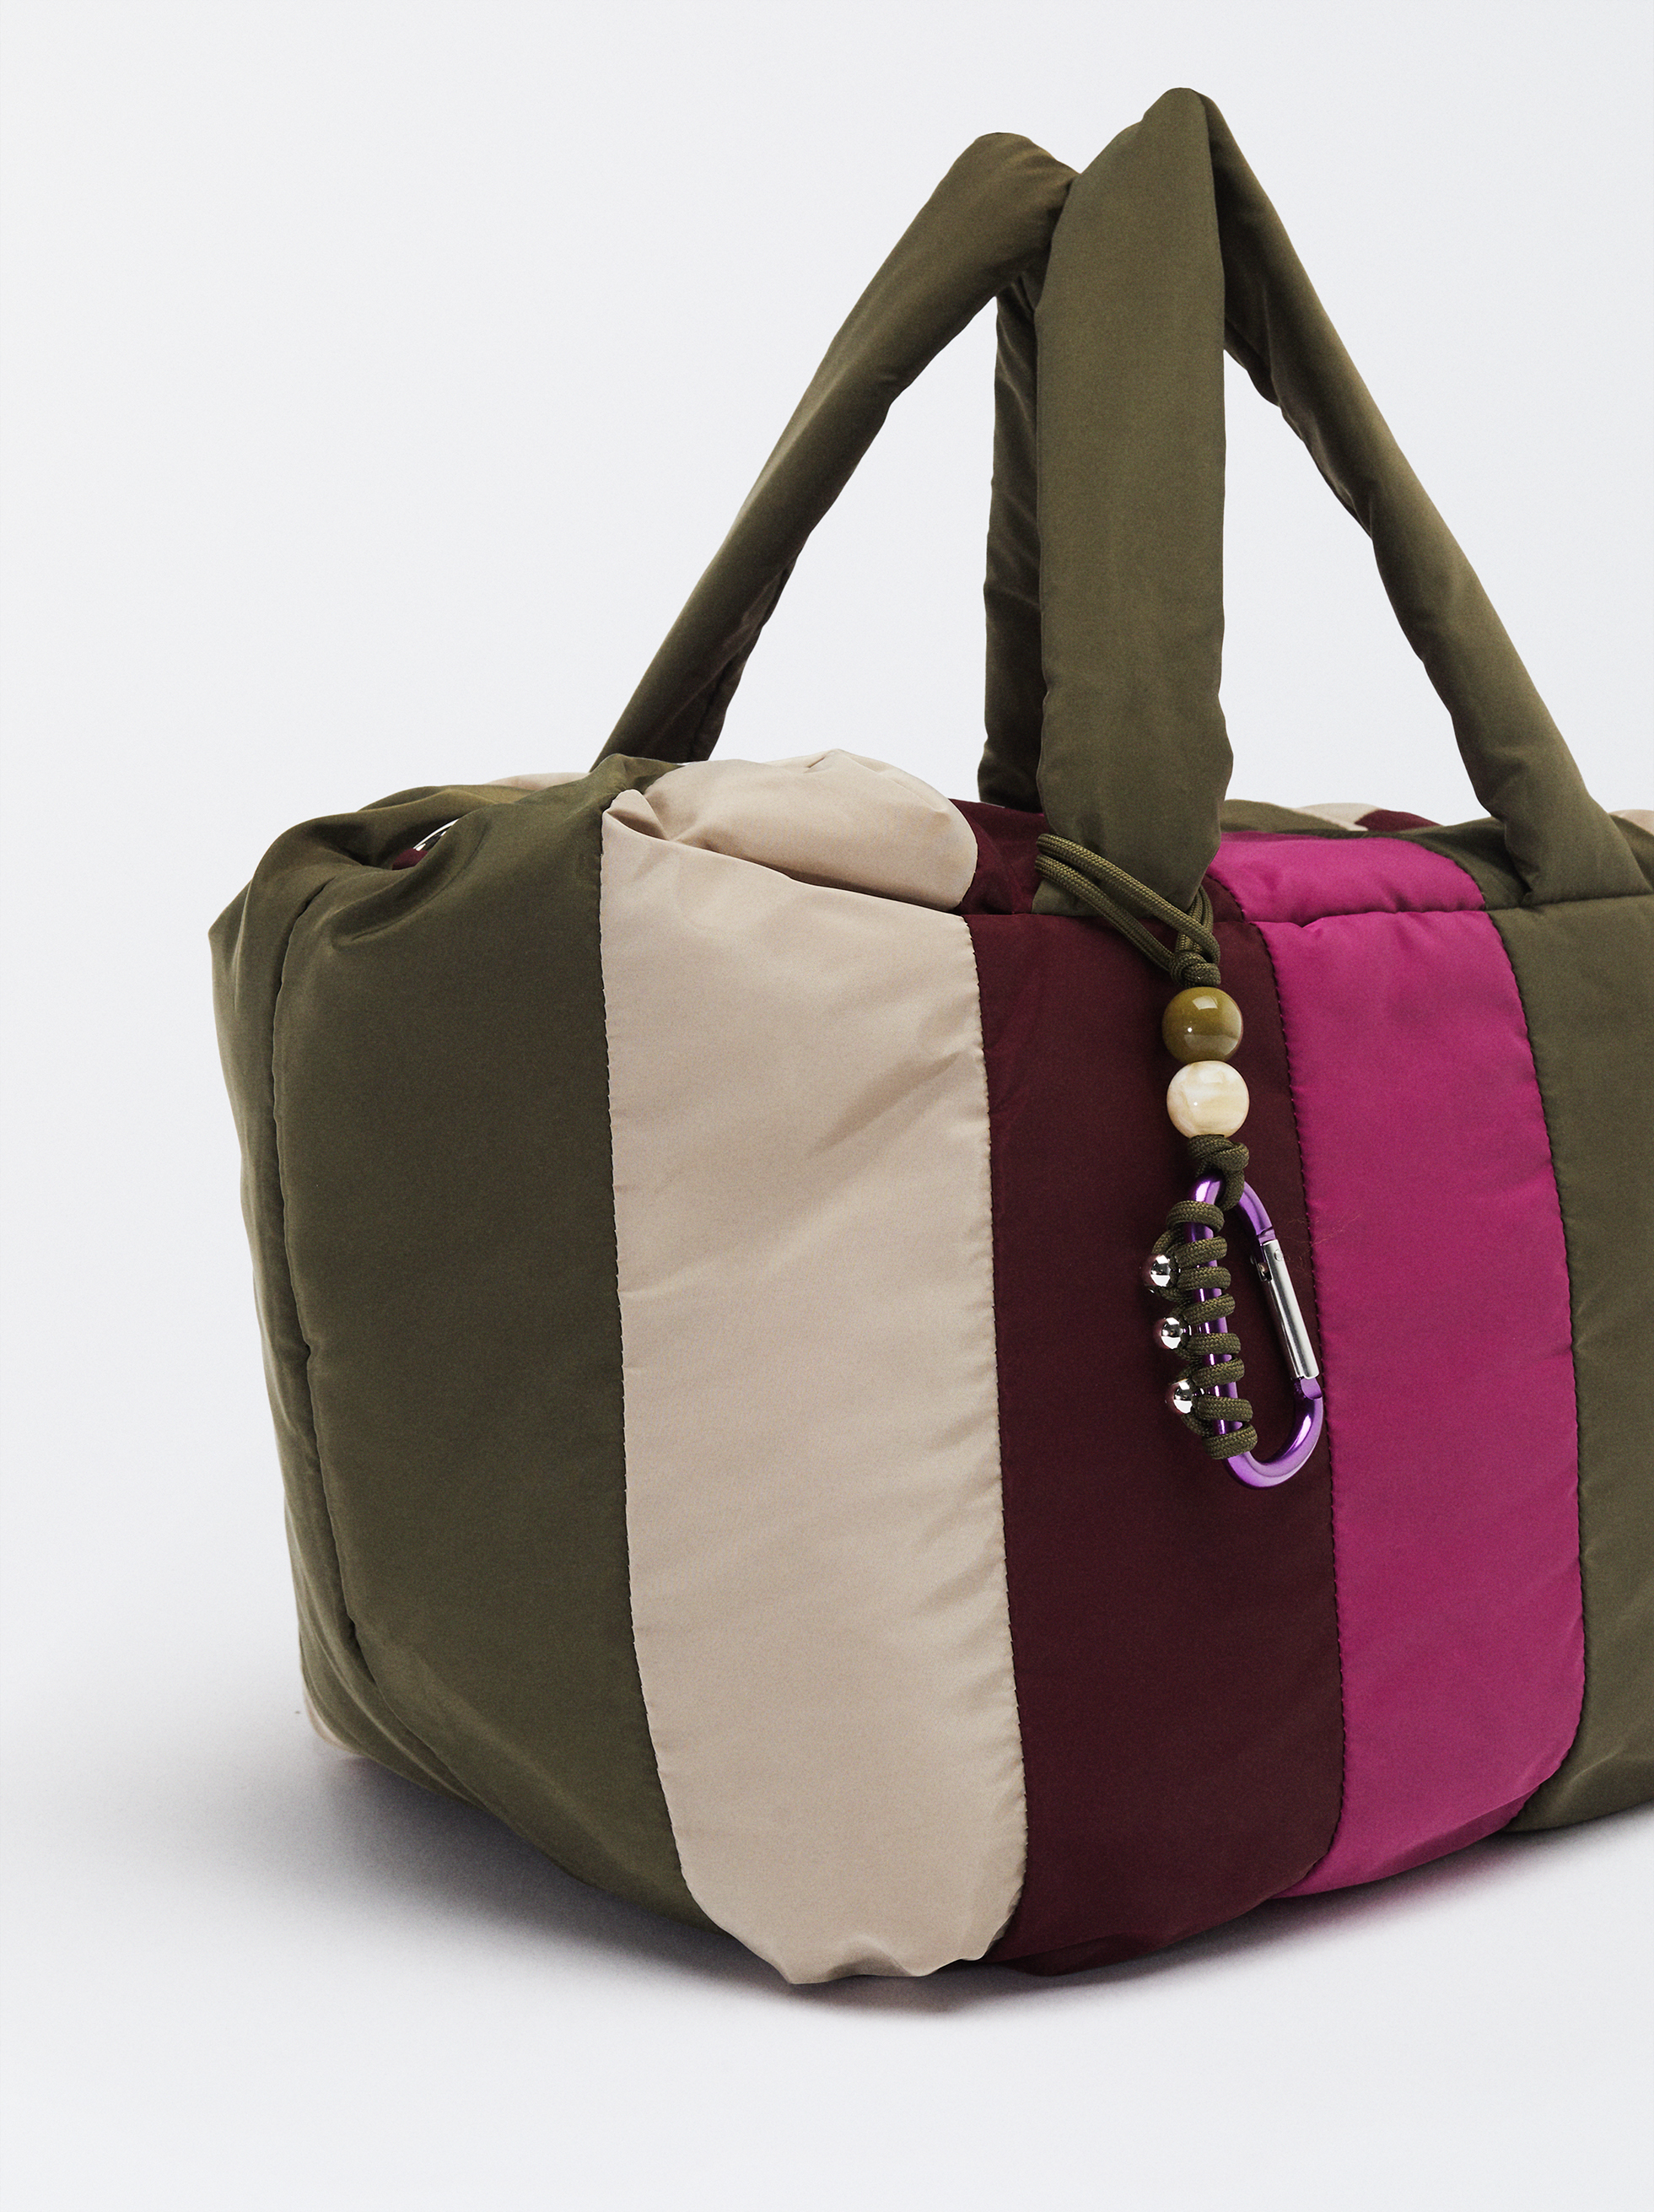 Bolso Shopper Con Rayas L image number 2.0